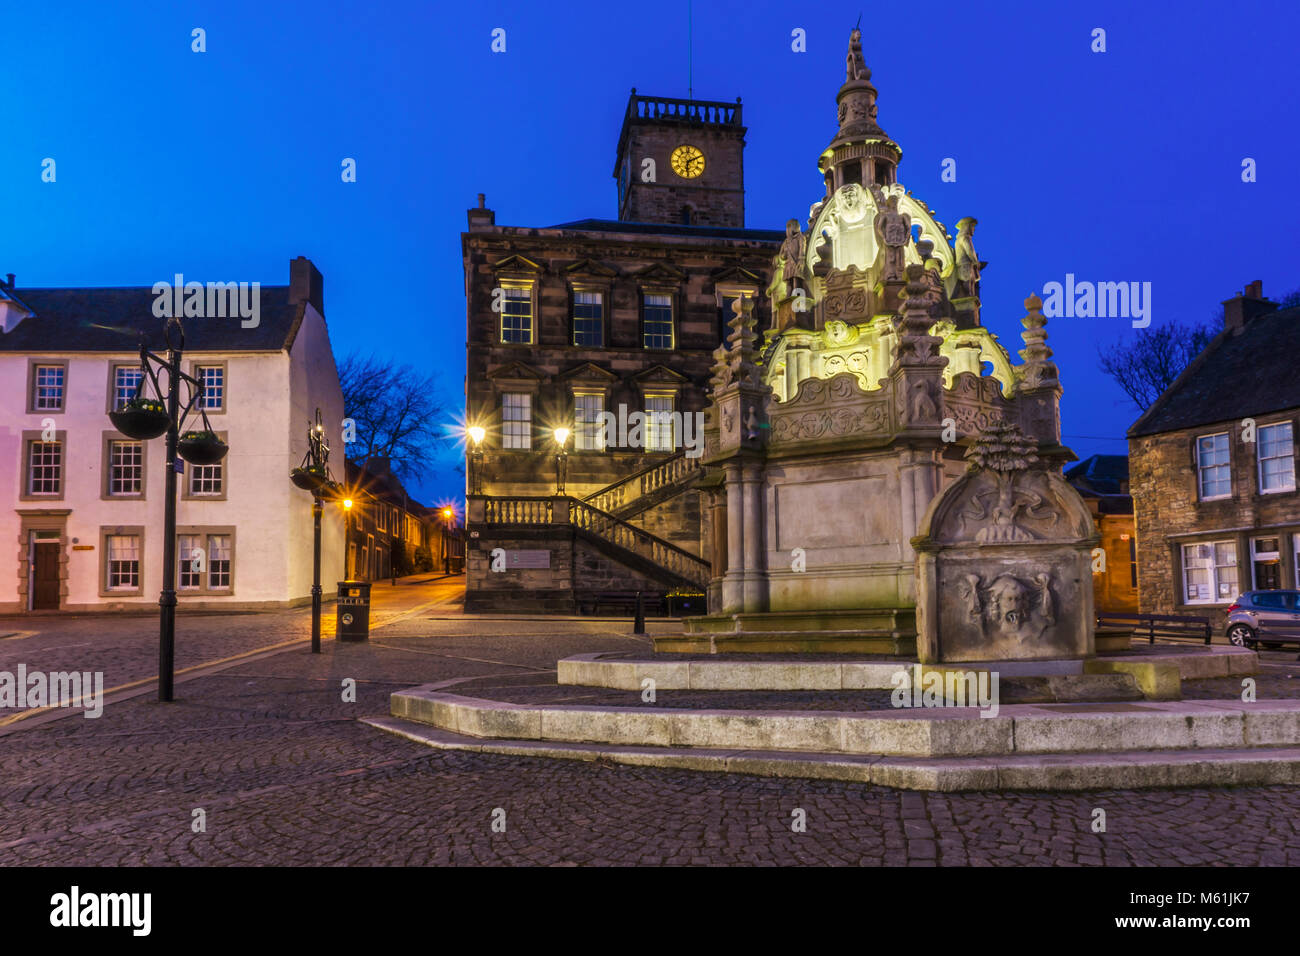 This is Linlithgow Cross, a replica of an original well erected in front of Linlithgow Palace by King James V in 1520. Stock Photo